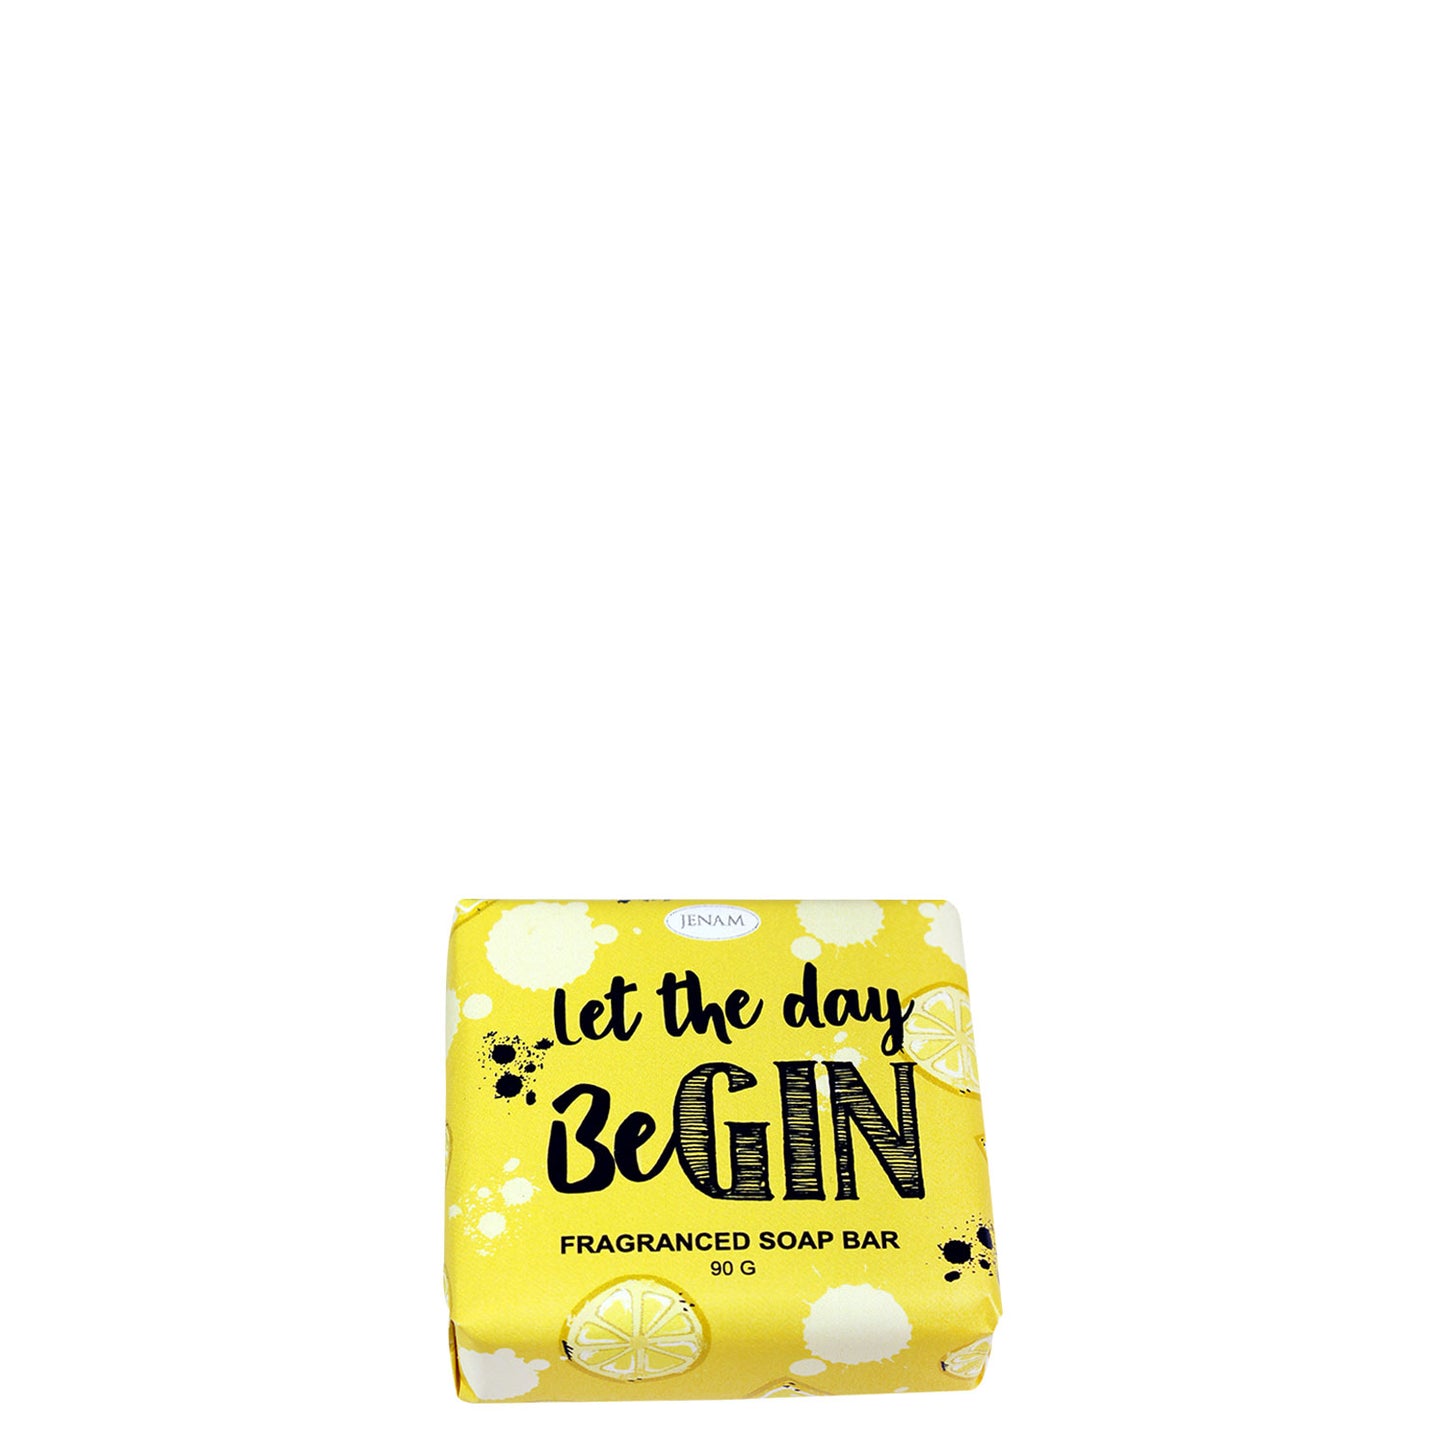 Happy Hour Fragranced Soap Bar - (Let The Day BeGin) -90g